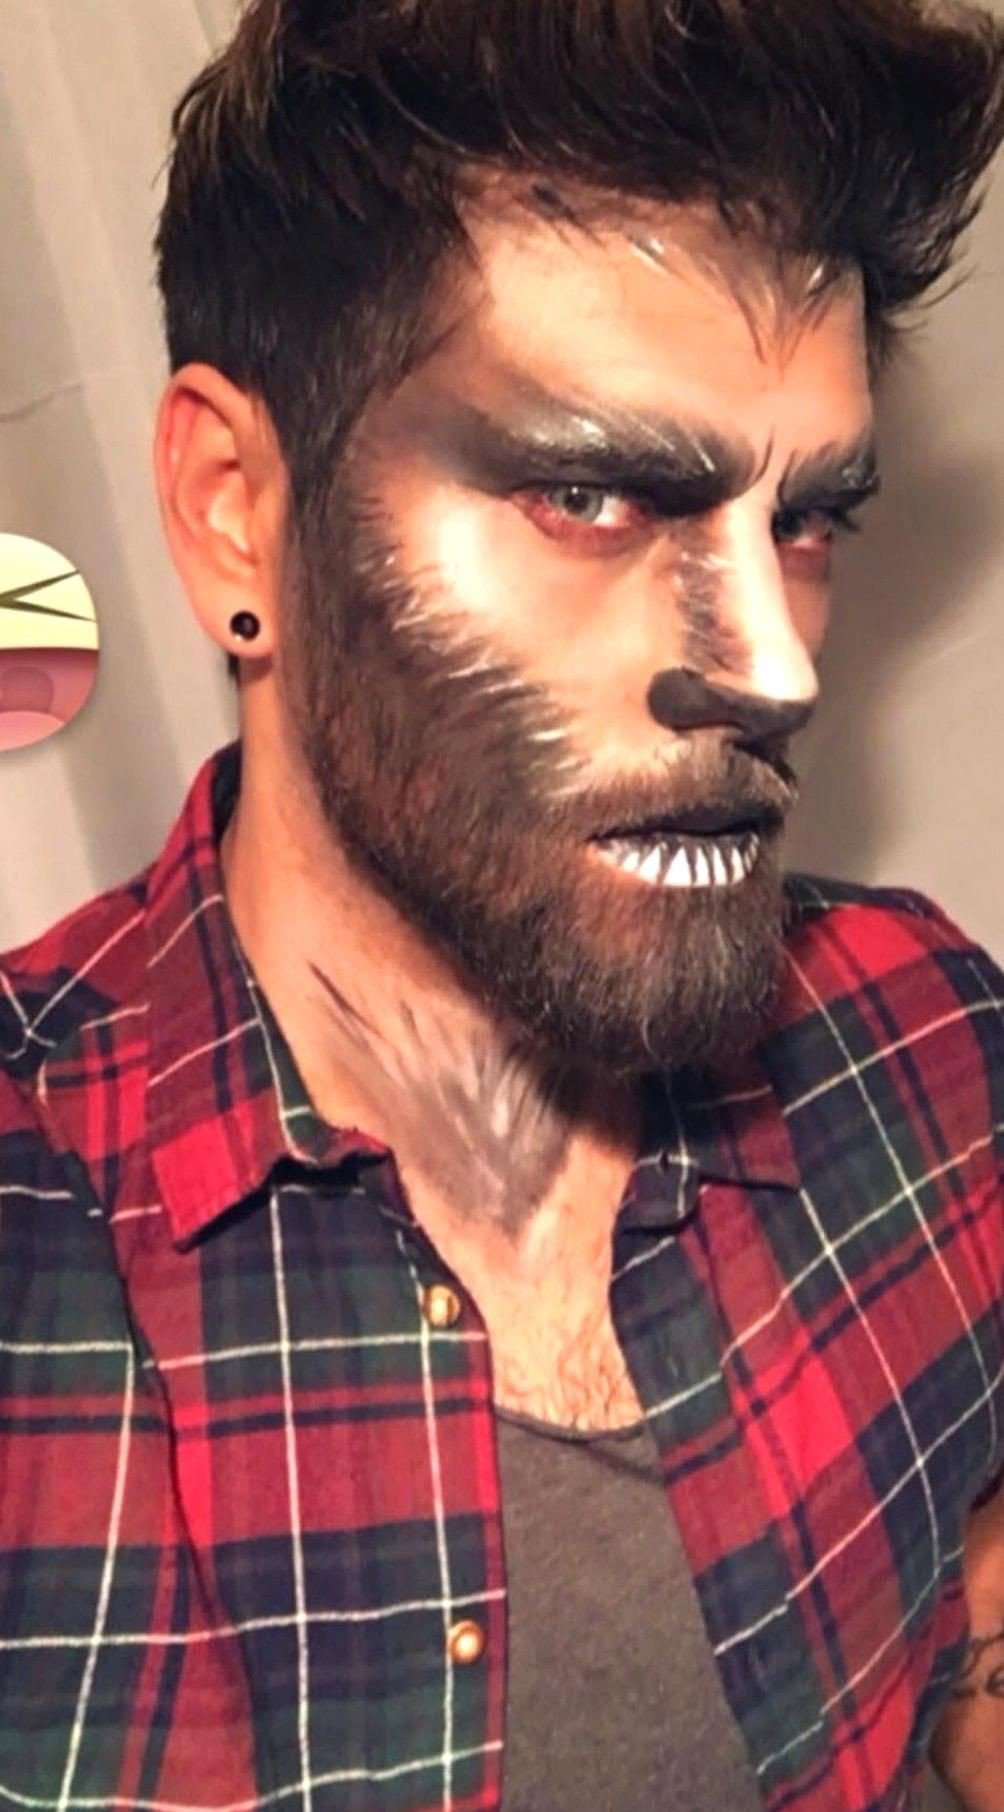 Watch the Photo by DirtyDaddyFunStuff with the username @DirtyDaddyPorn, who is a verified user, posted on January 12, 2024 and the text says 'Men 20 #halloween #hairy'